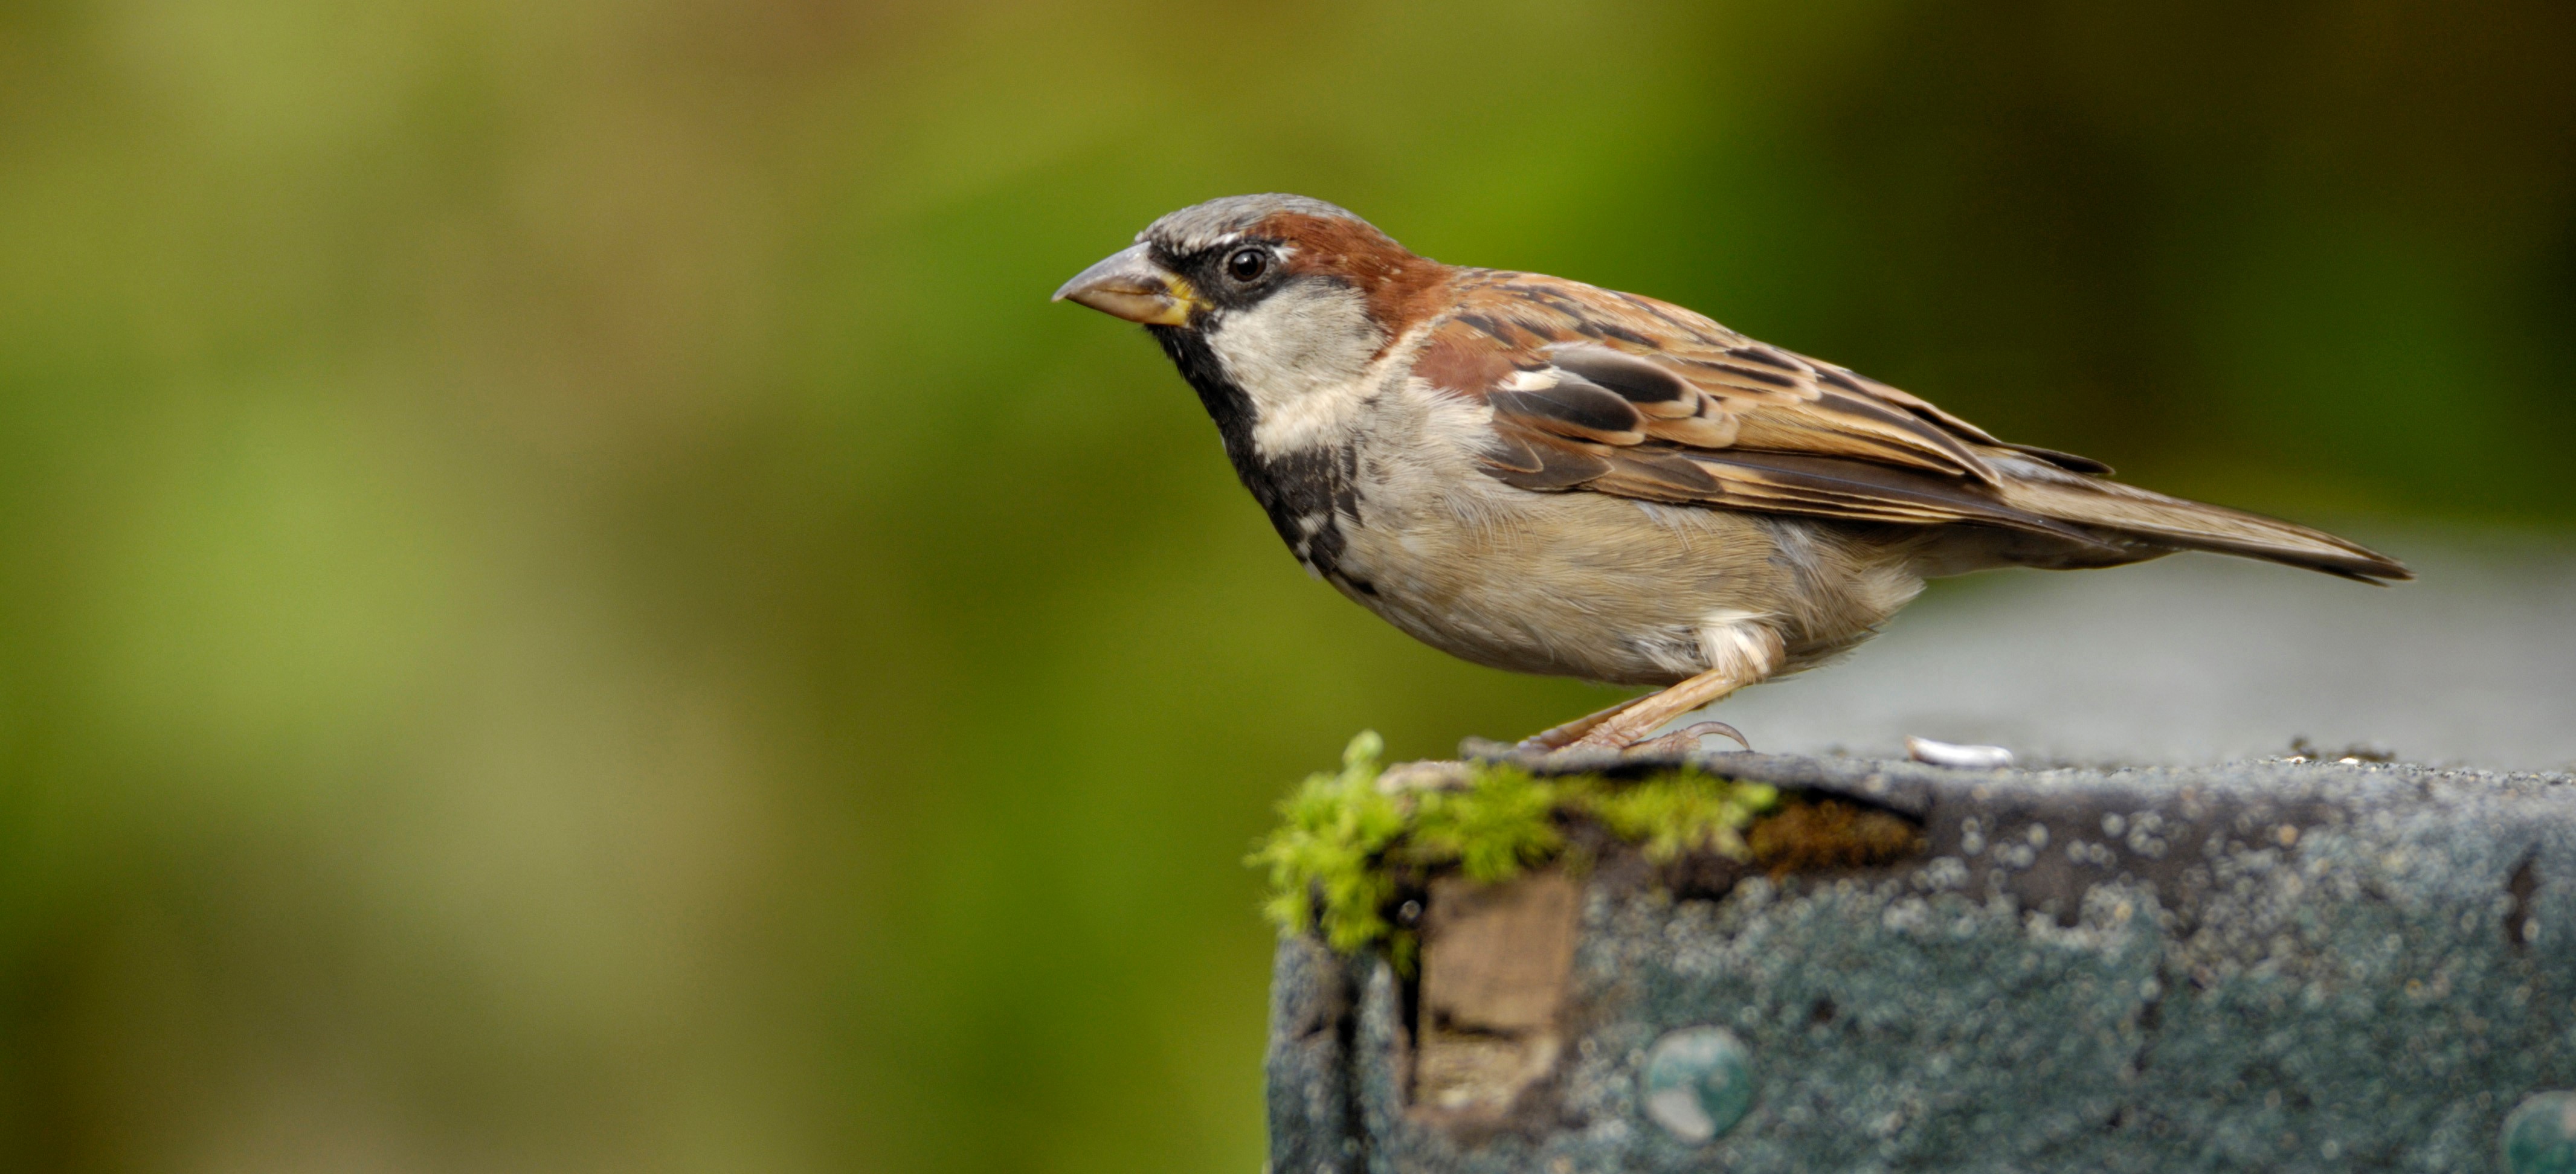 Urban House Sparrows | Causes of Population Decline - The RSPB